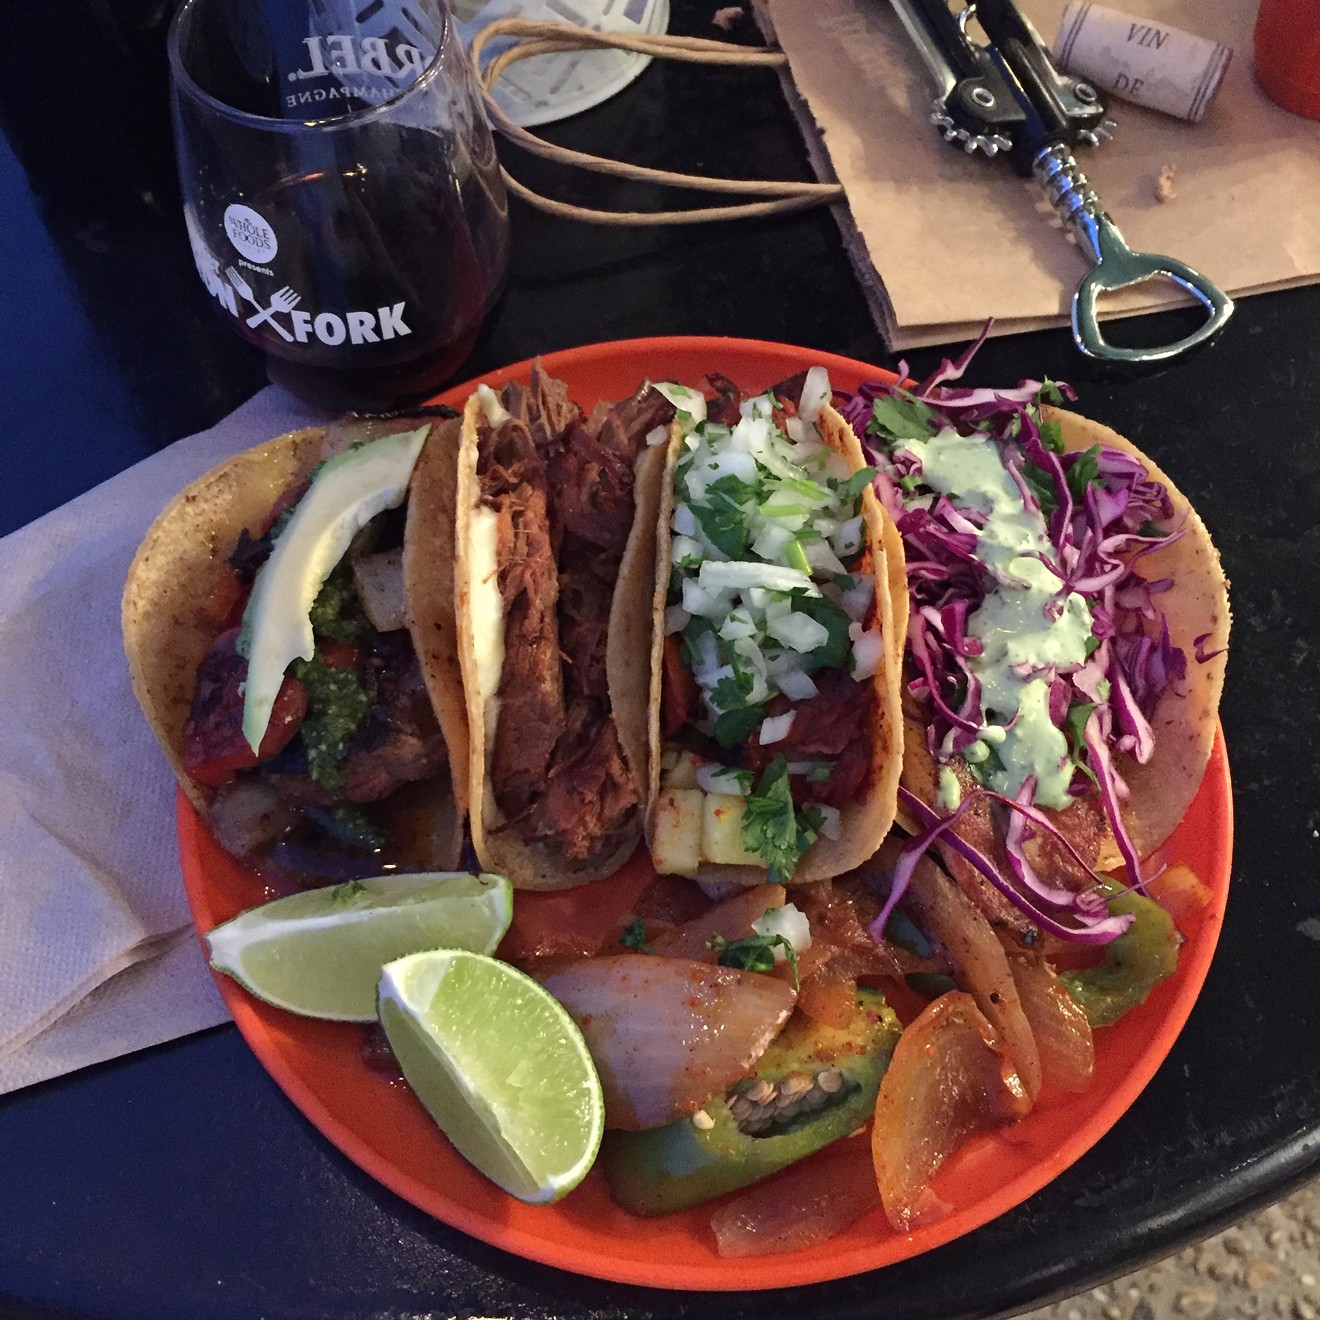 Taco 'bout perfection — the Texano taco ($2.50; second from left) is particularly radiant in all its beefy glory.